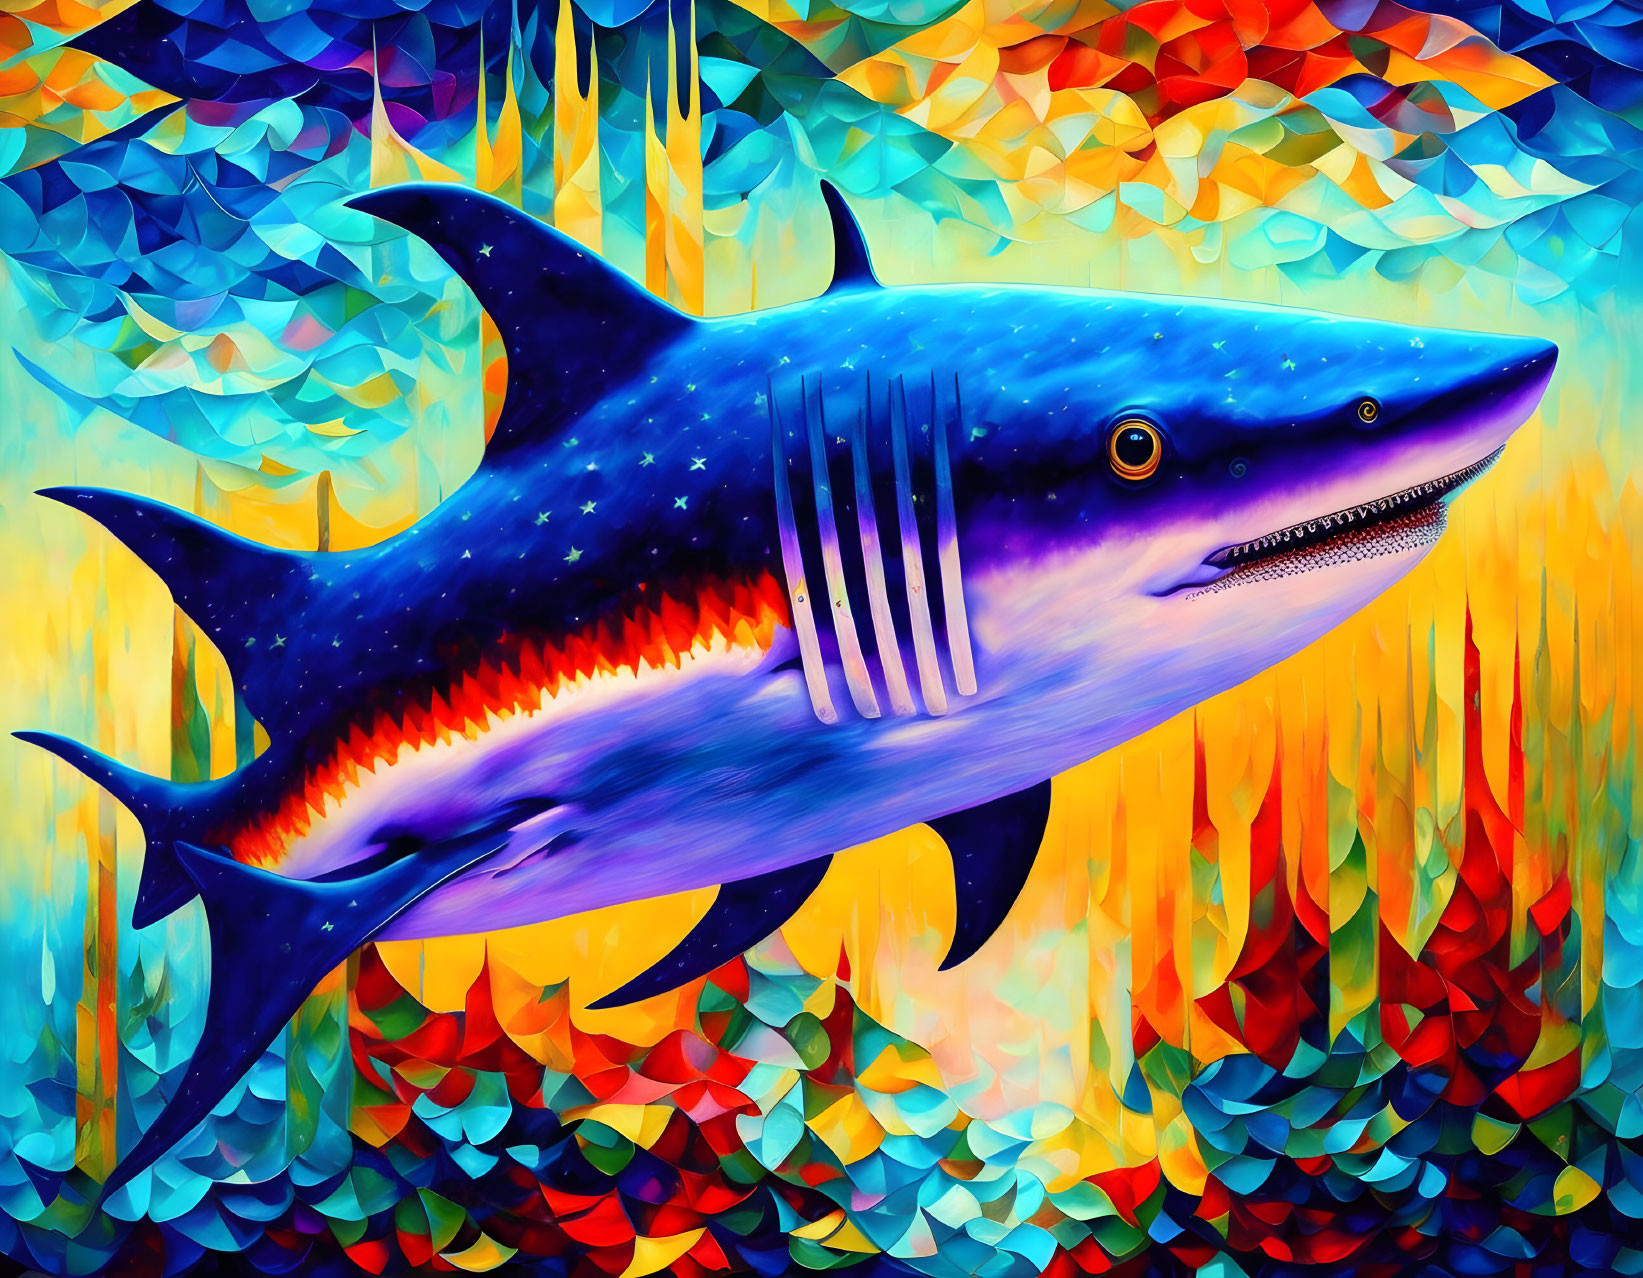 Colorful Shark Digital Illustration with Abstract Mosaic Background